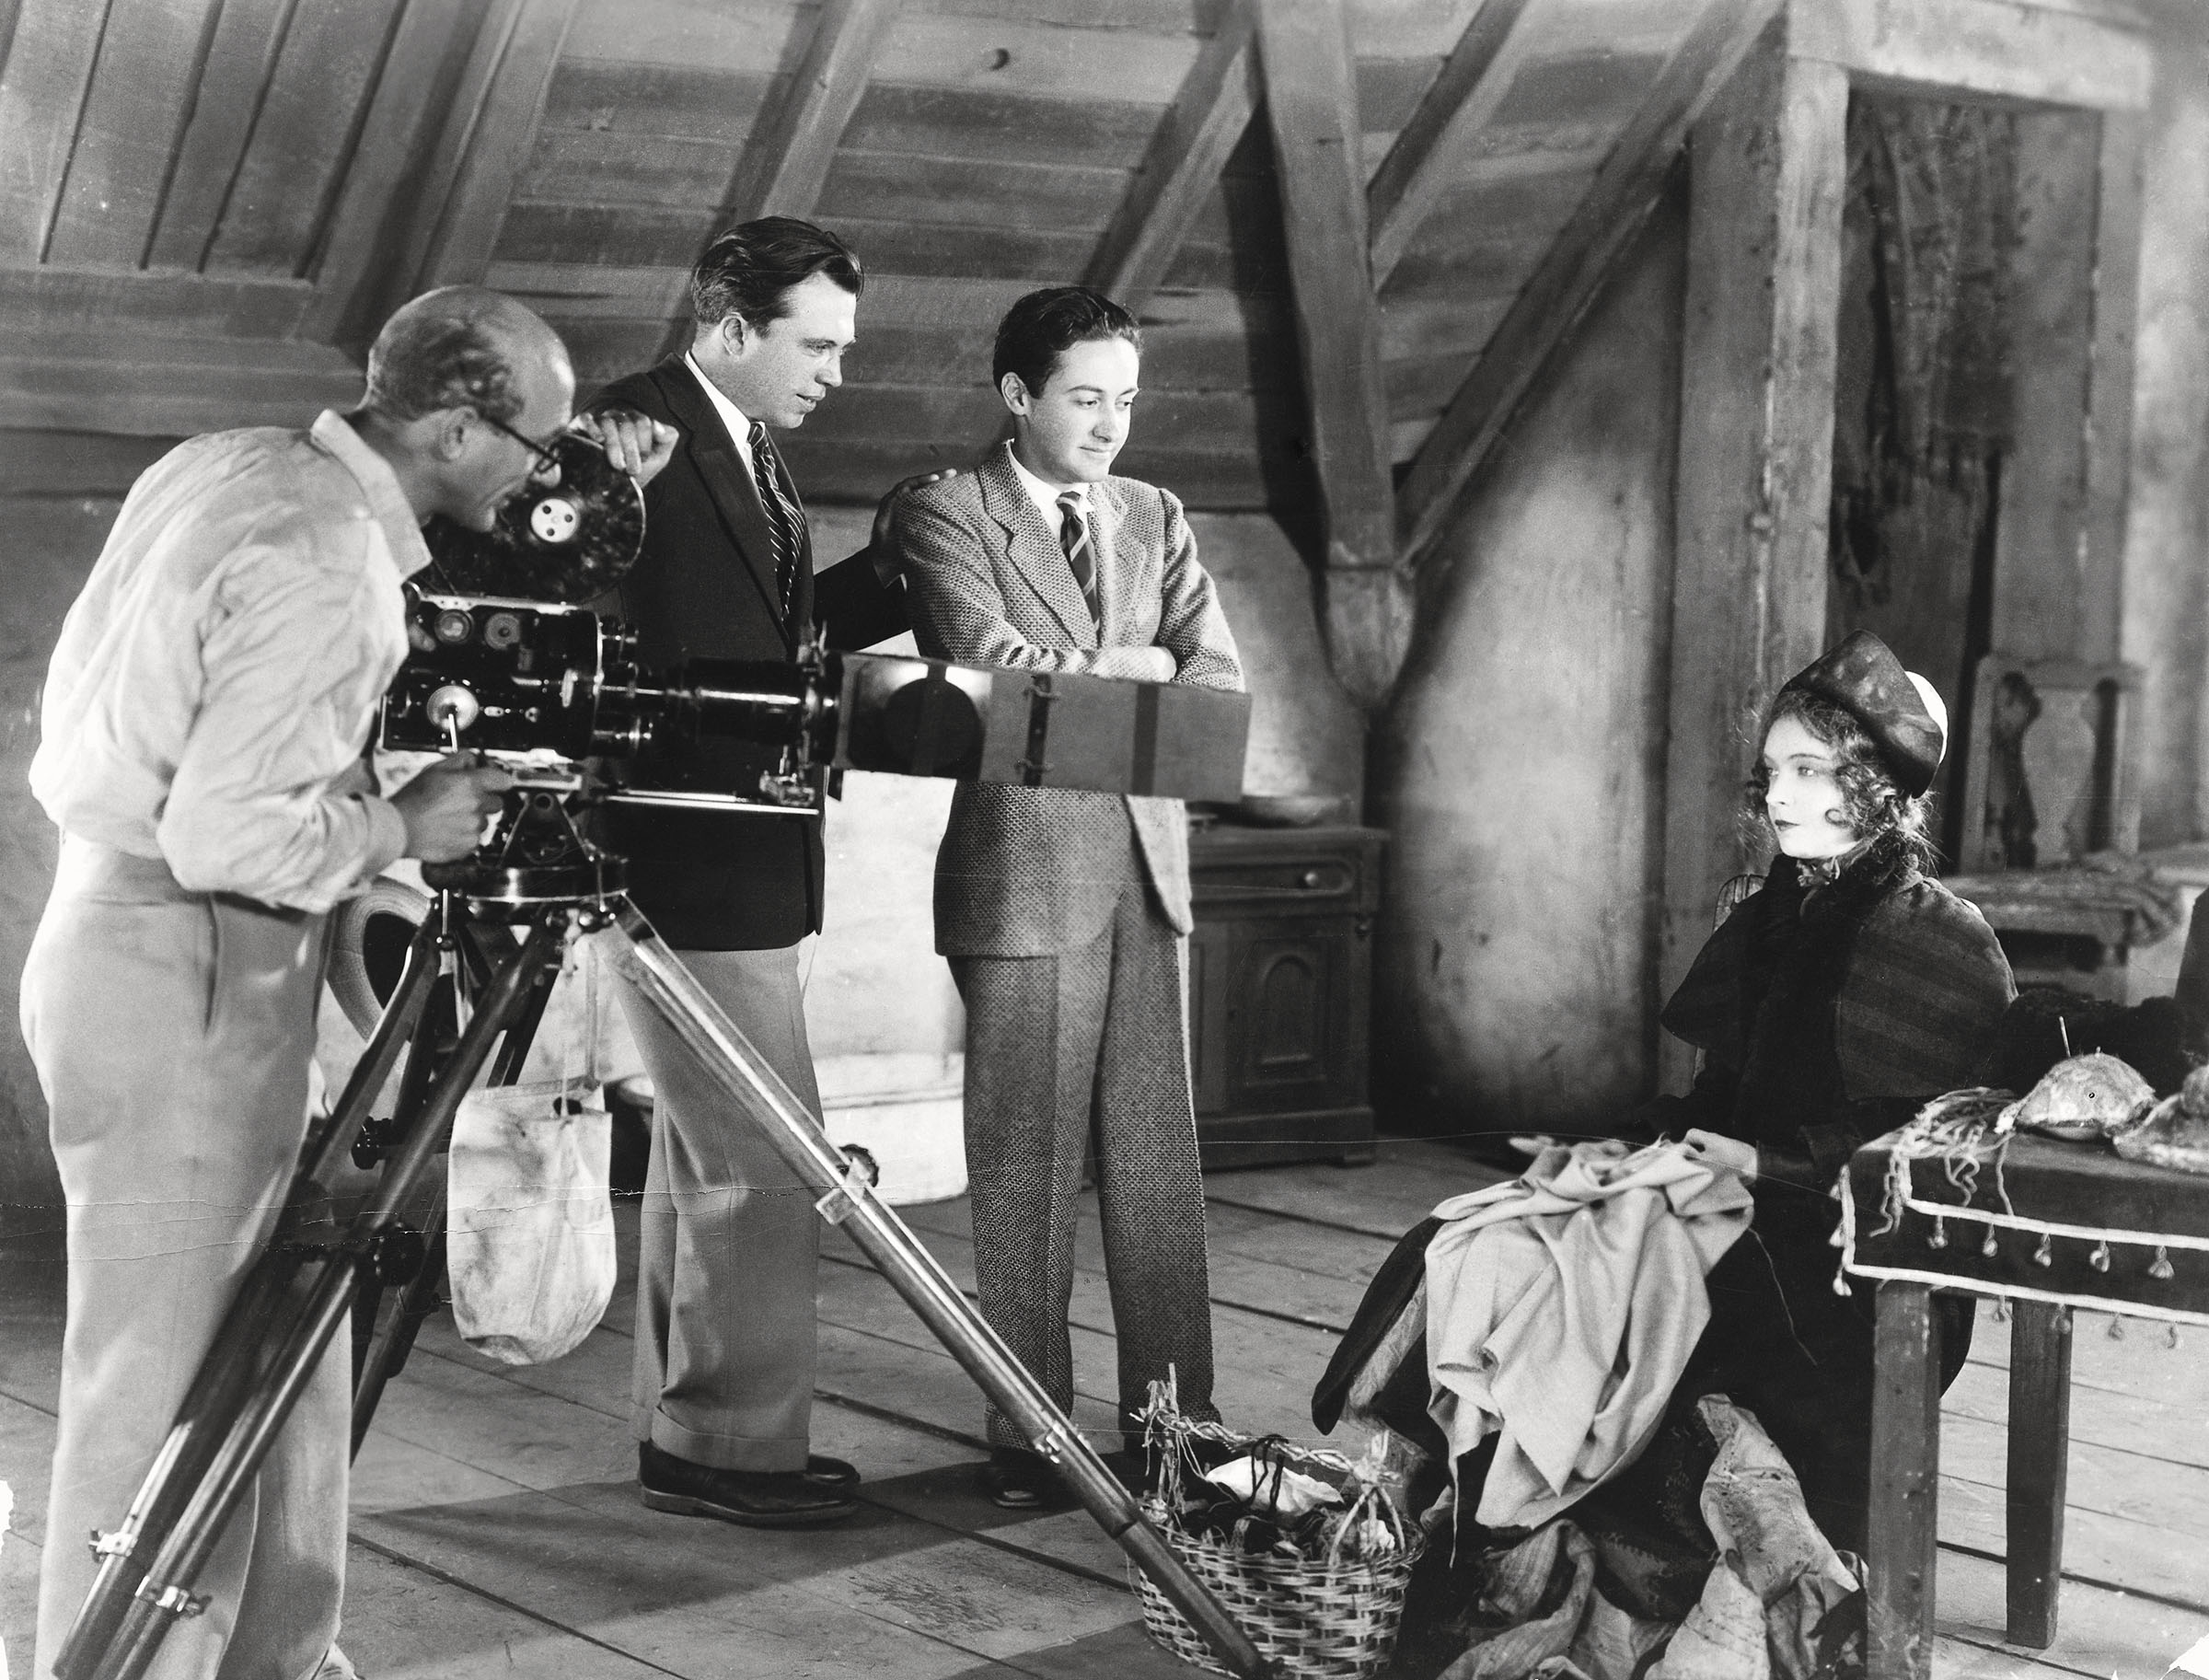 A black and white photo of a group of people standing on a film set